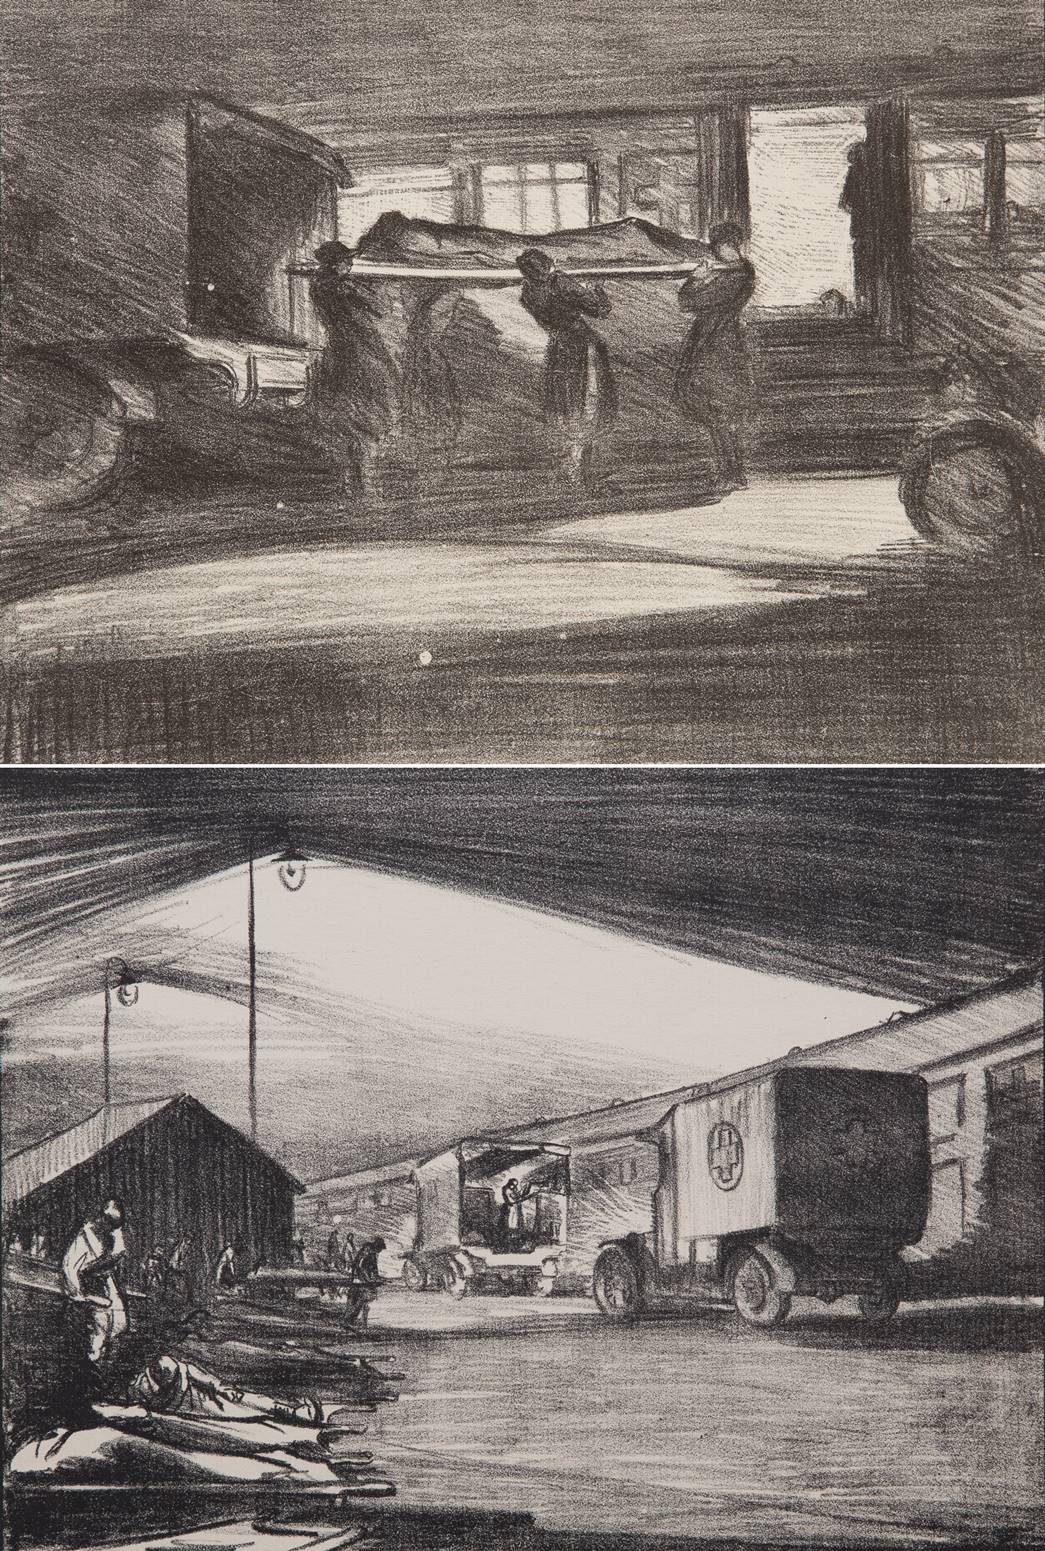 VAD convoy unloading an ambulance train at night

Olive Mudie-Cooke. Lithograph, 1920-21. (Courtesy: British Red Cross Museum) 
